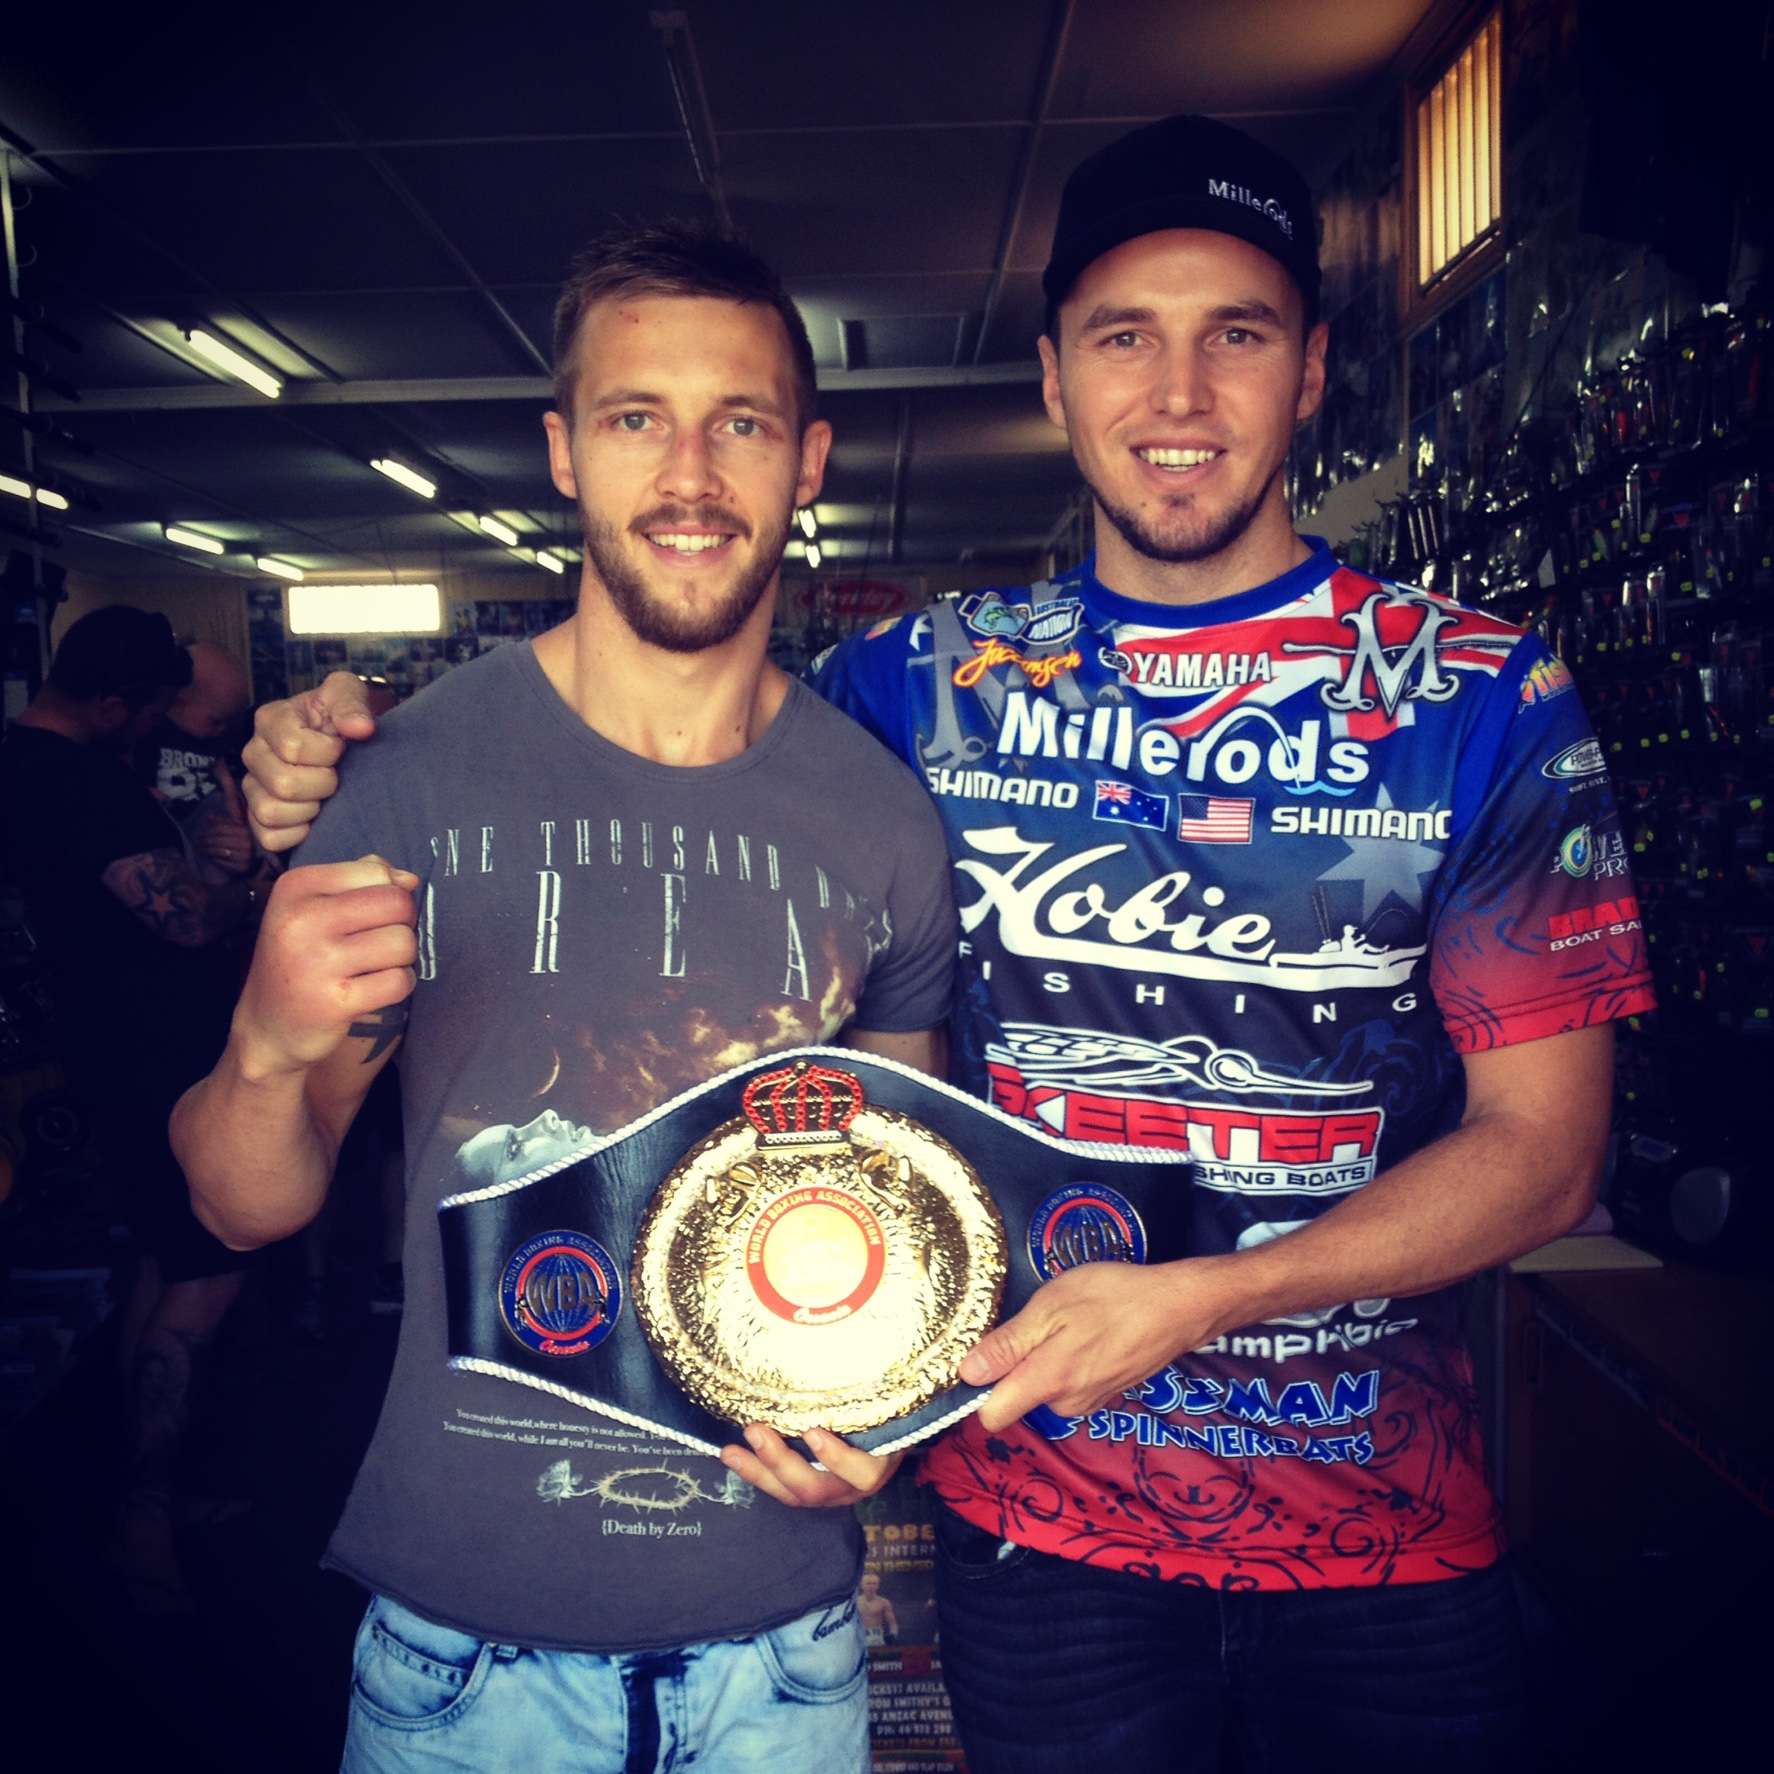 Jocumsen spent some of his down time supporting Kris before his WBA Oceania title fight.